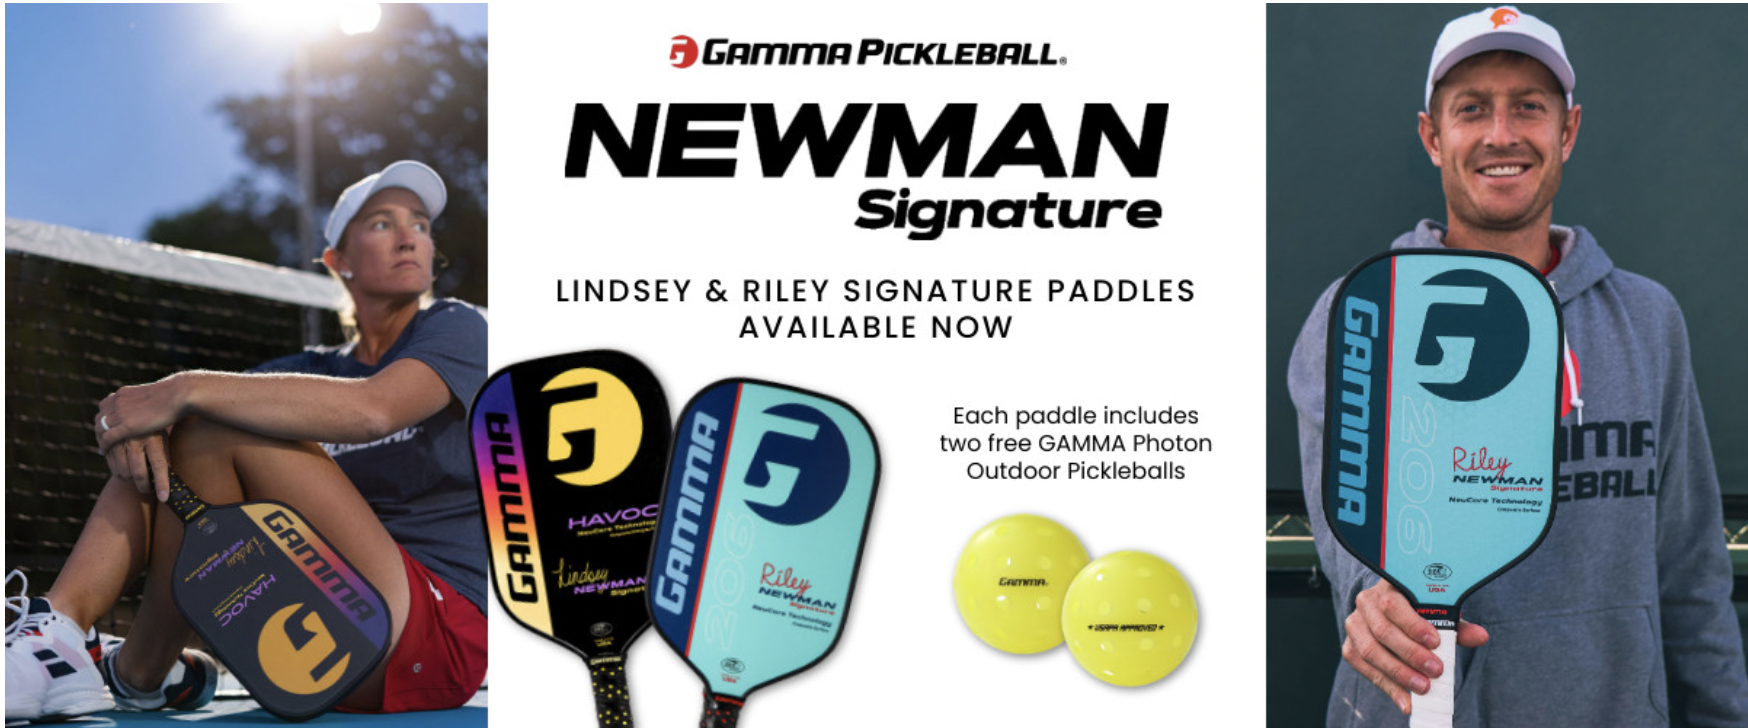 Gamma Pickleball Paddles featuring Riley and Lindsay Newman